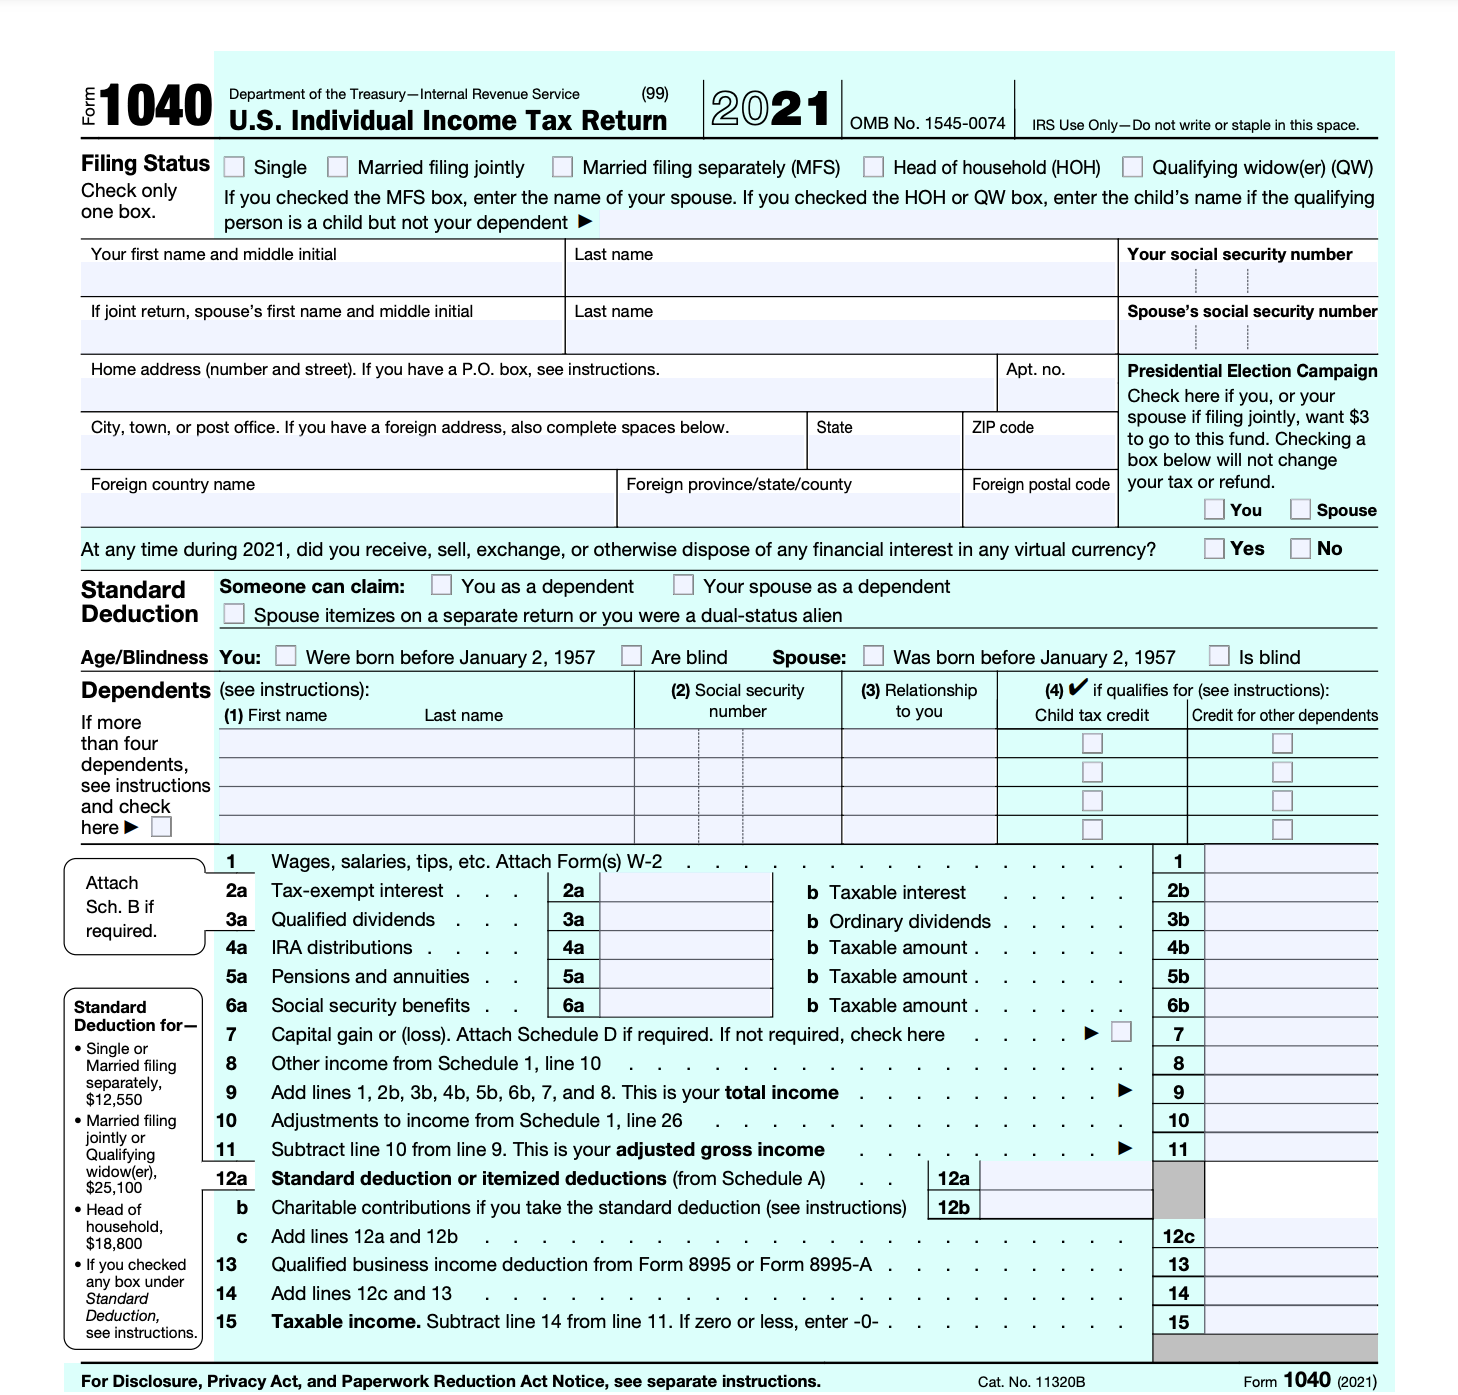 Irs Schedule 1 2022 Instructions What Is Irs Form 1040? (Overview And Instructions) | Bench Accounting